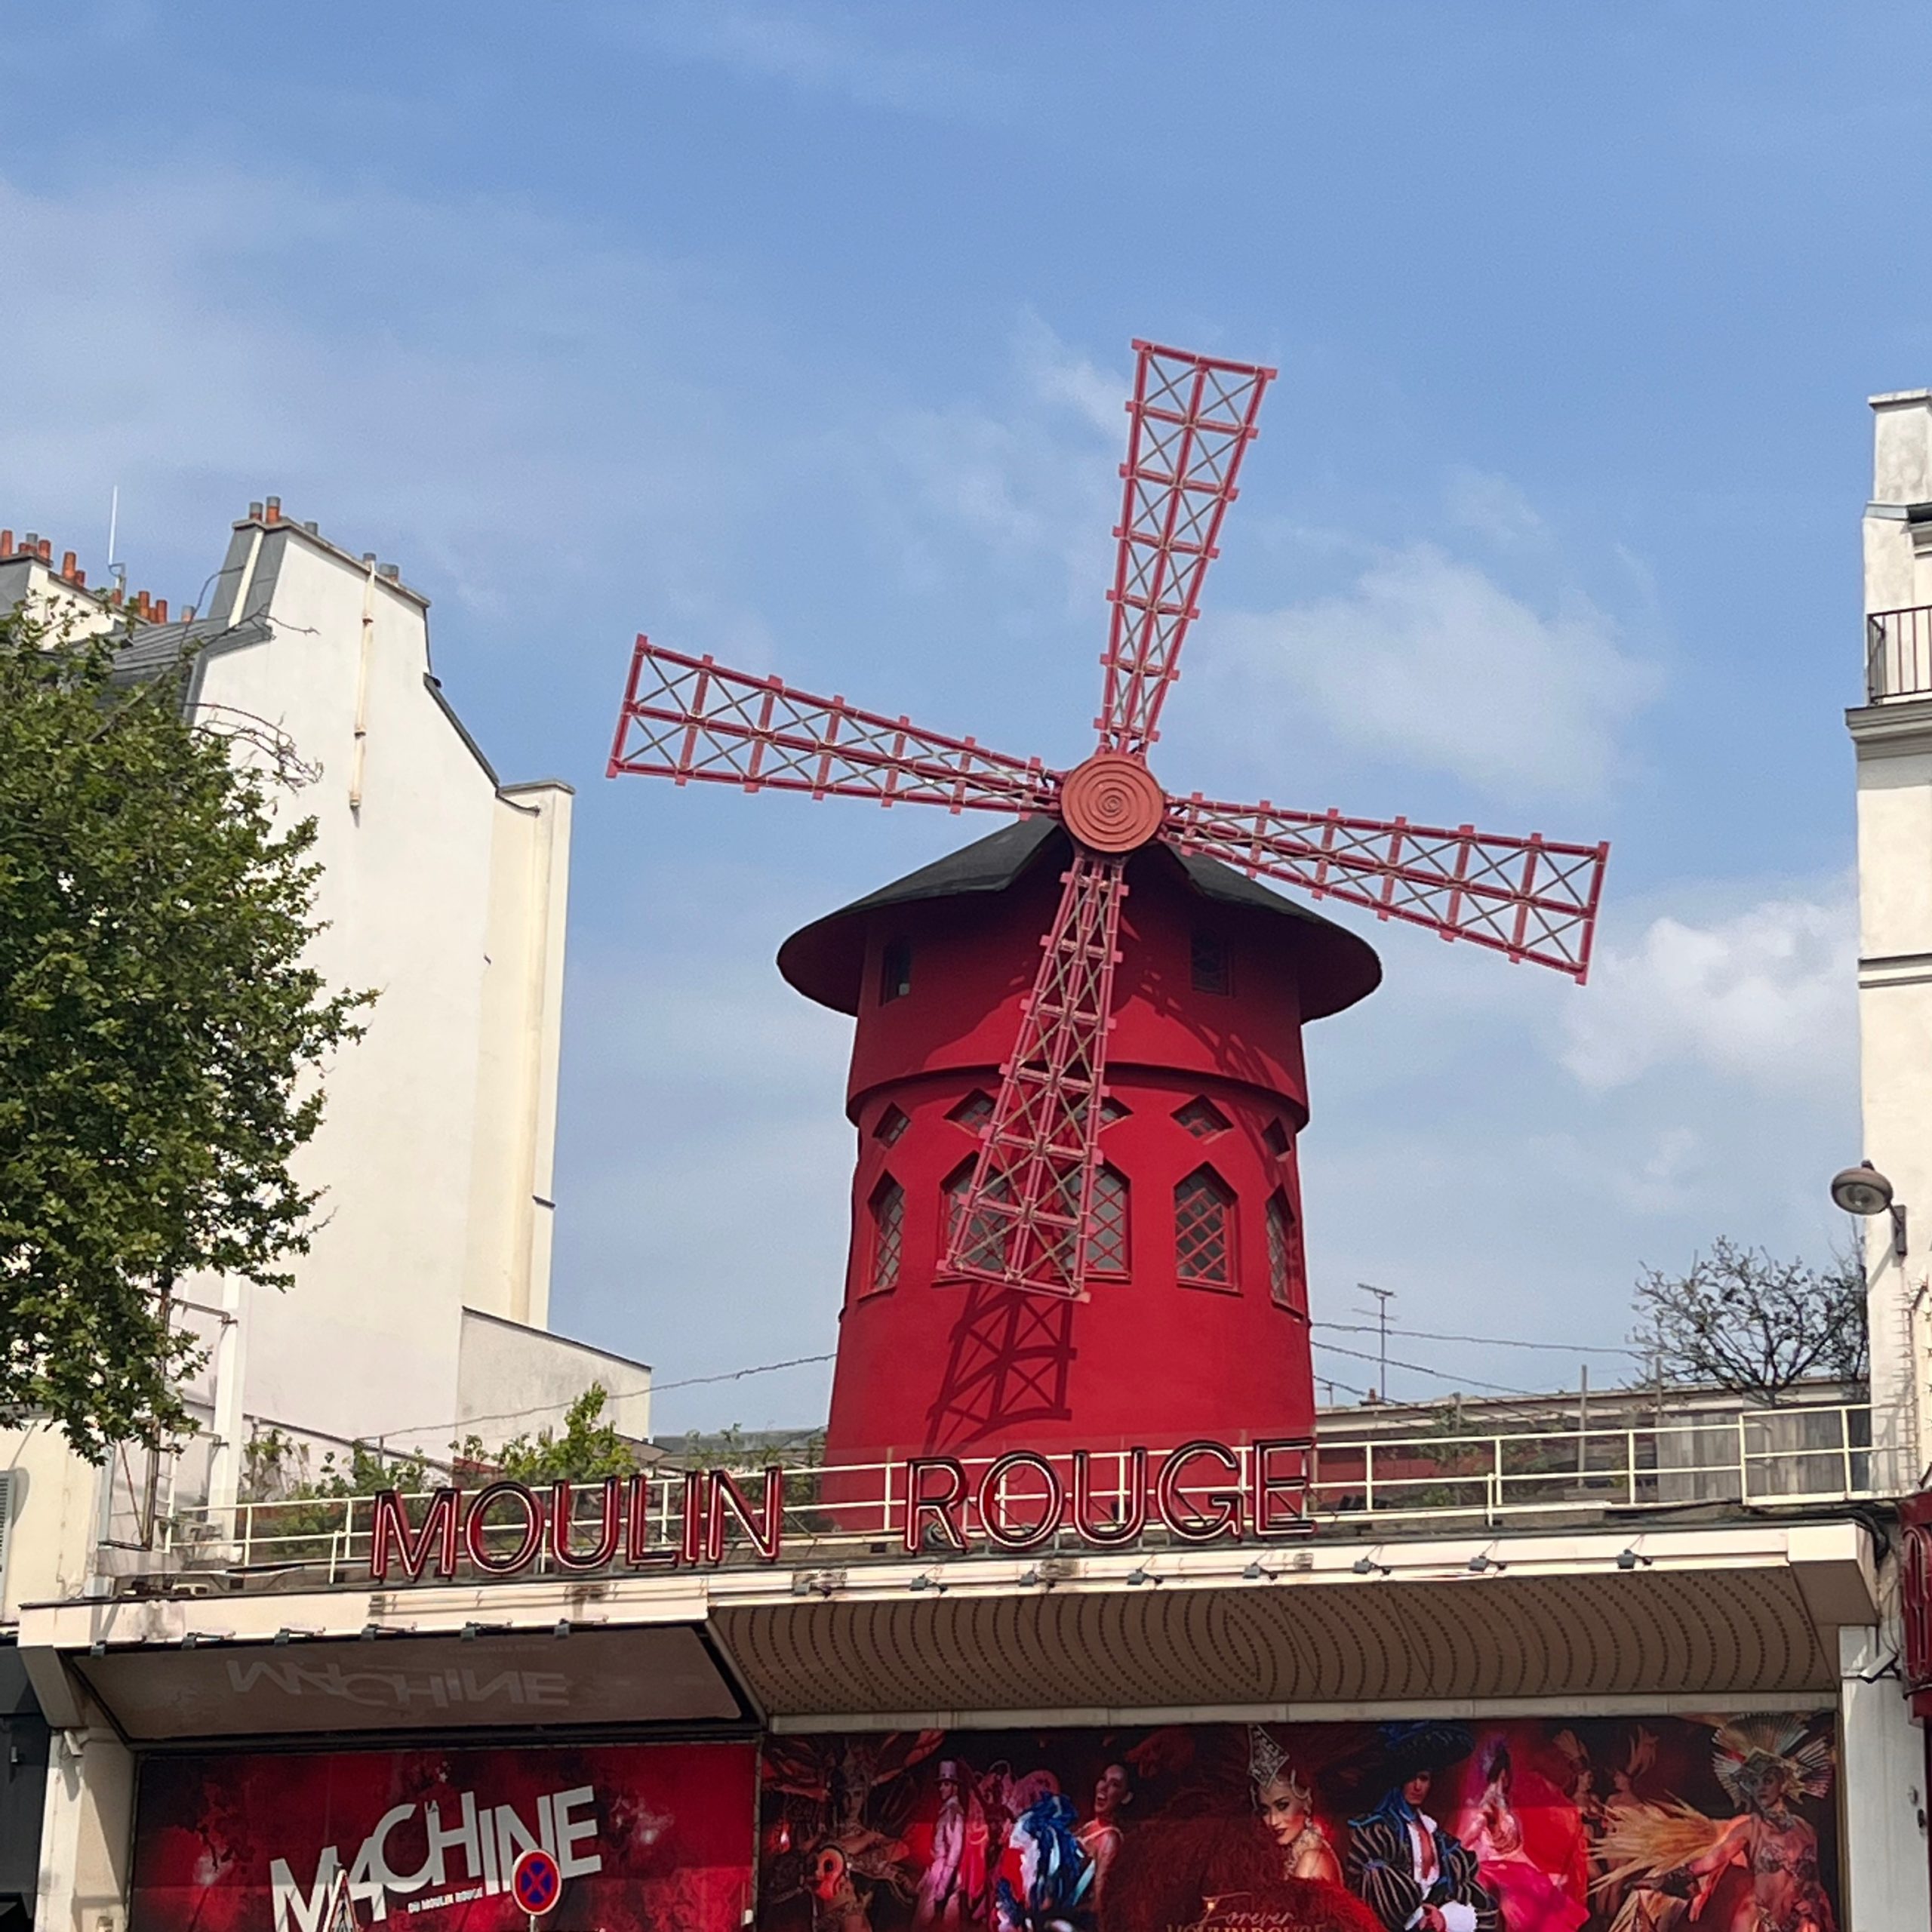 Moulin-Rouge